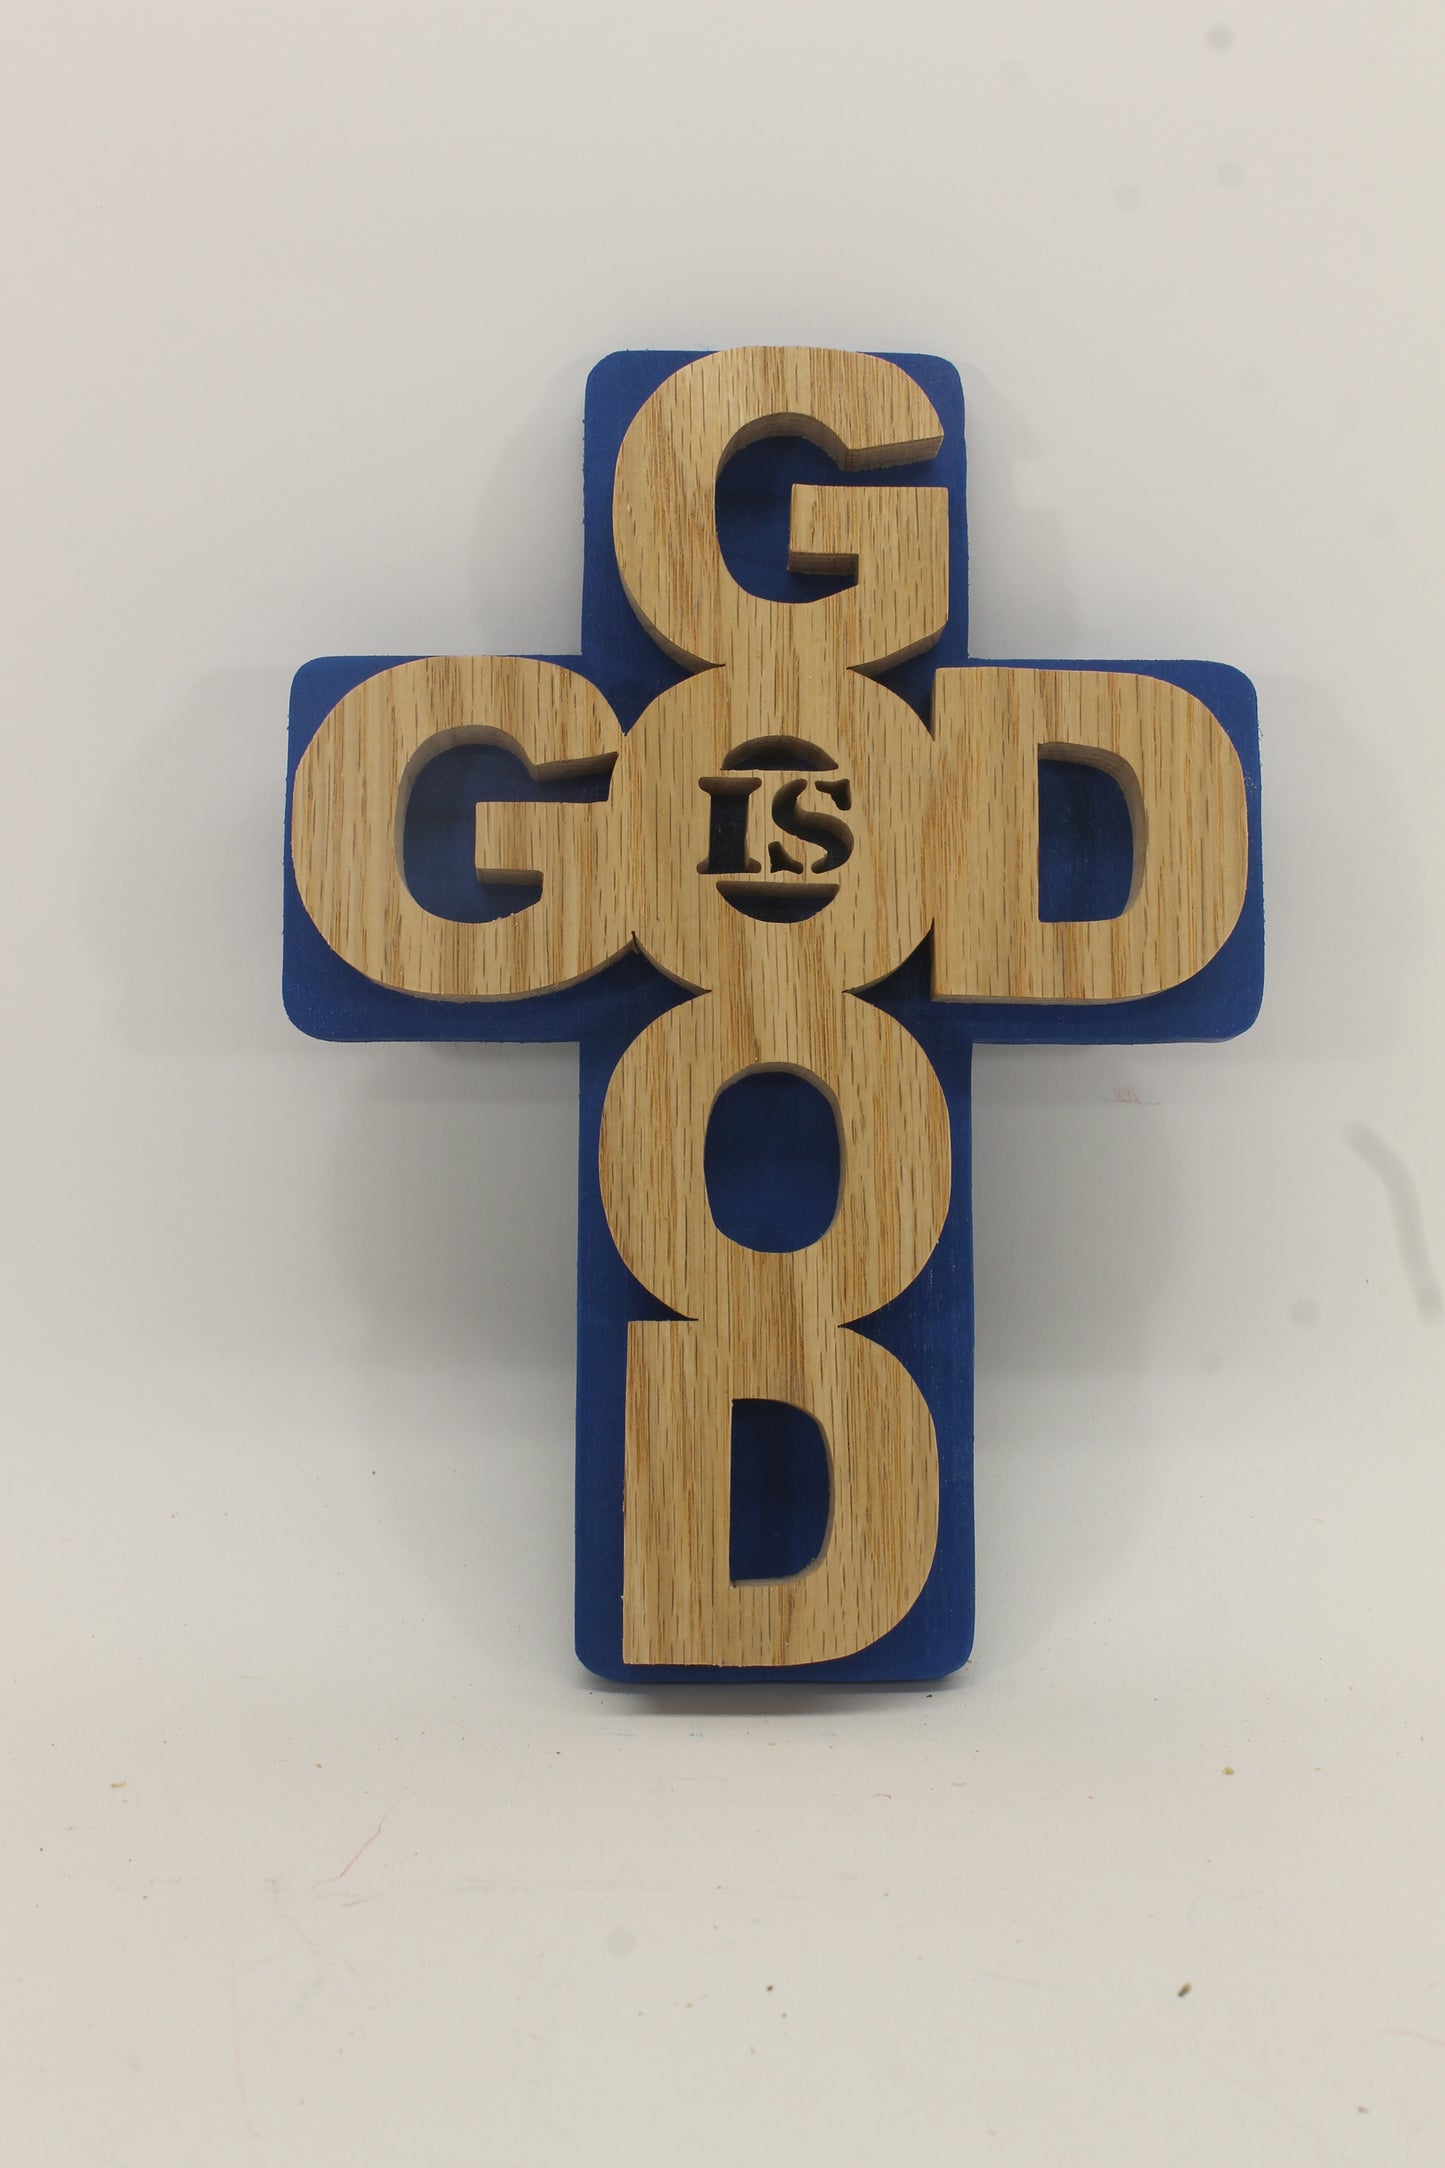 God is good wall hanging for home or office